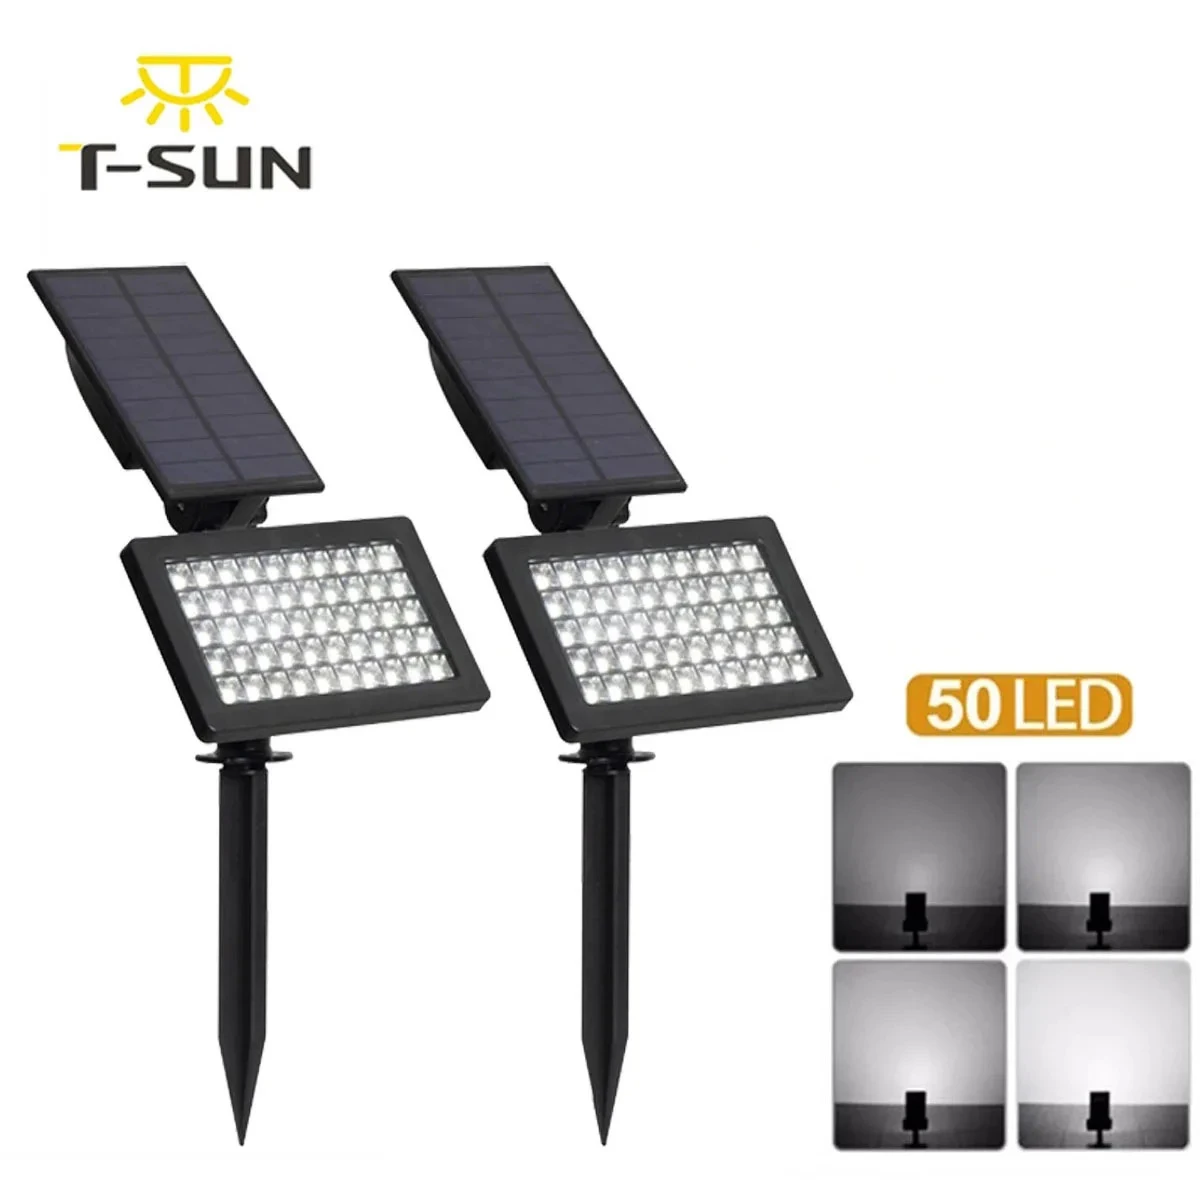 T-SUN 1-2pcs 50 leds Solar Garden Lights Adjustable Outdoor Solar Lamp IP44 Waterproof Wall Lighting for Garden Decoration Light 2pcs microwave oven refrigerator bulb spare repair parts accessories 230v 20w lamp replacement for lg galanz midea samsung